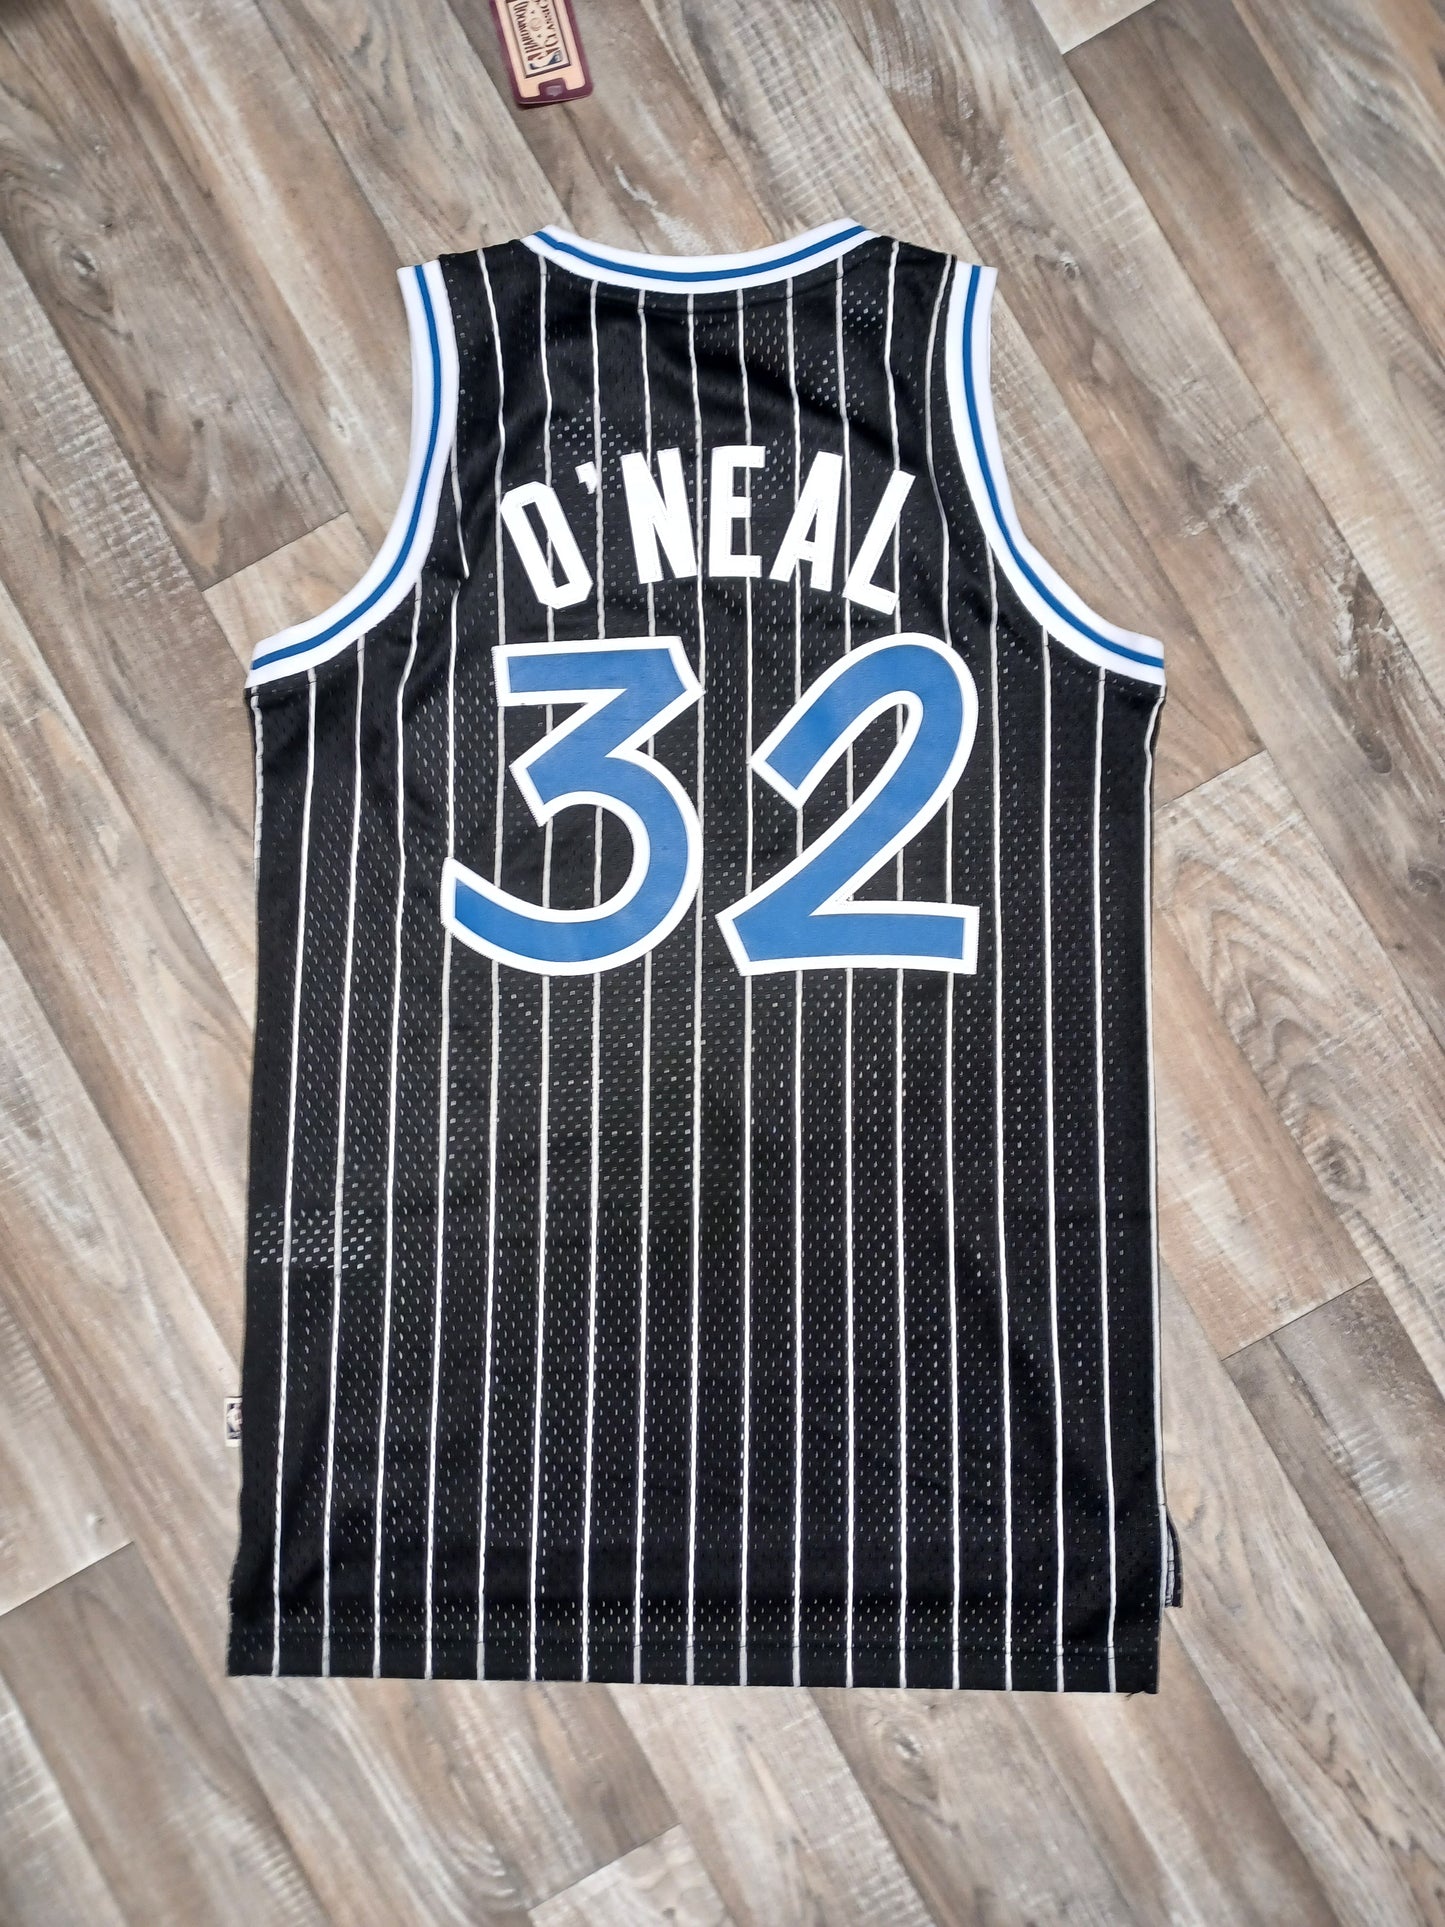 Shaquille O'Neal Orlando Magic Jersey Size Small